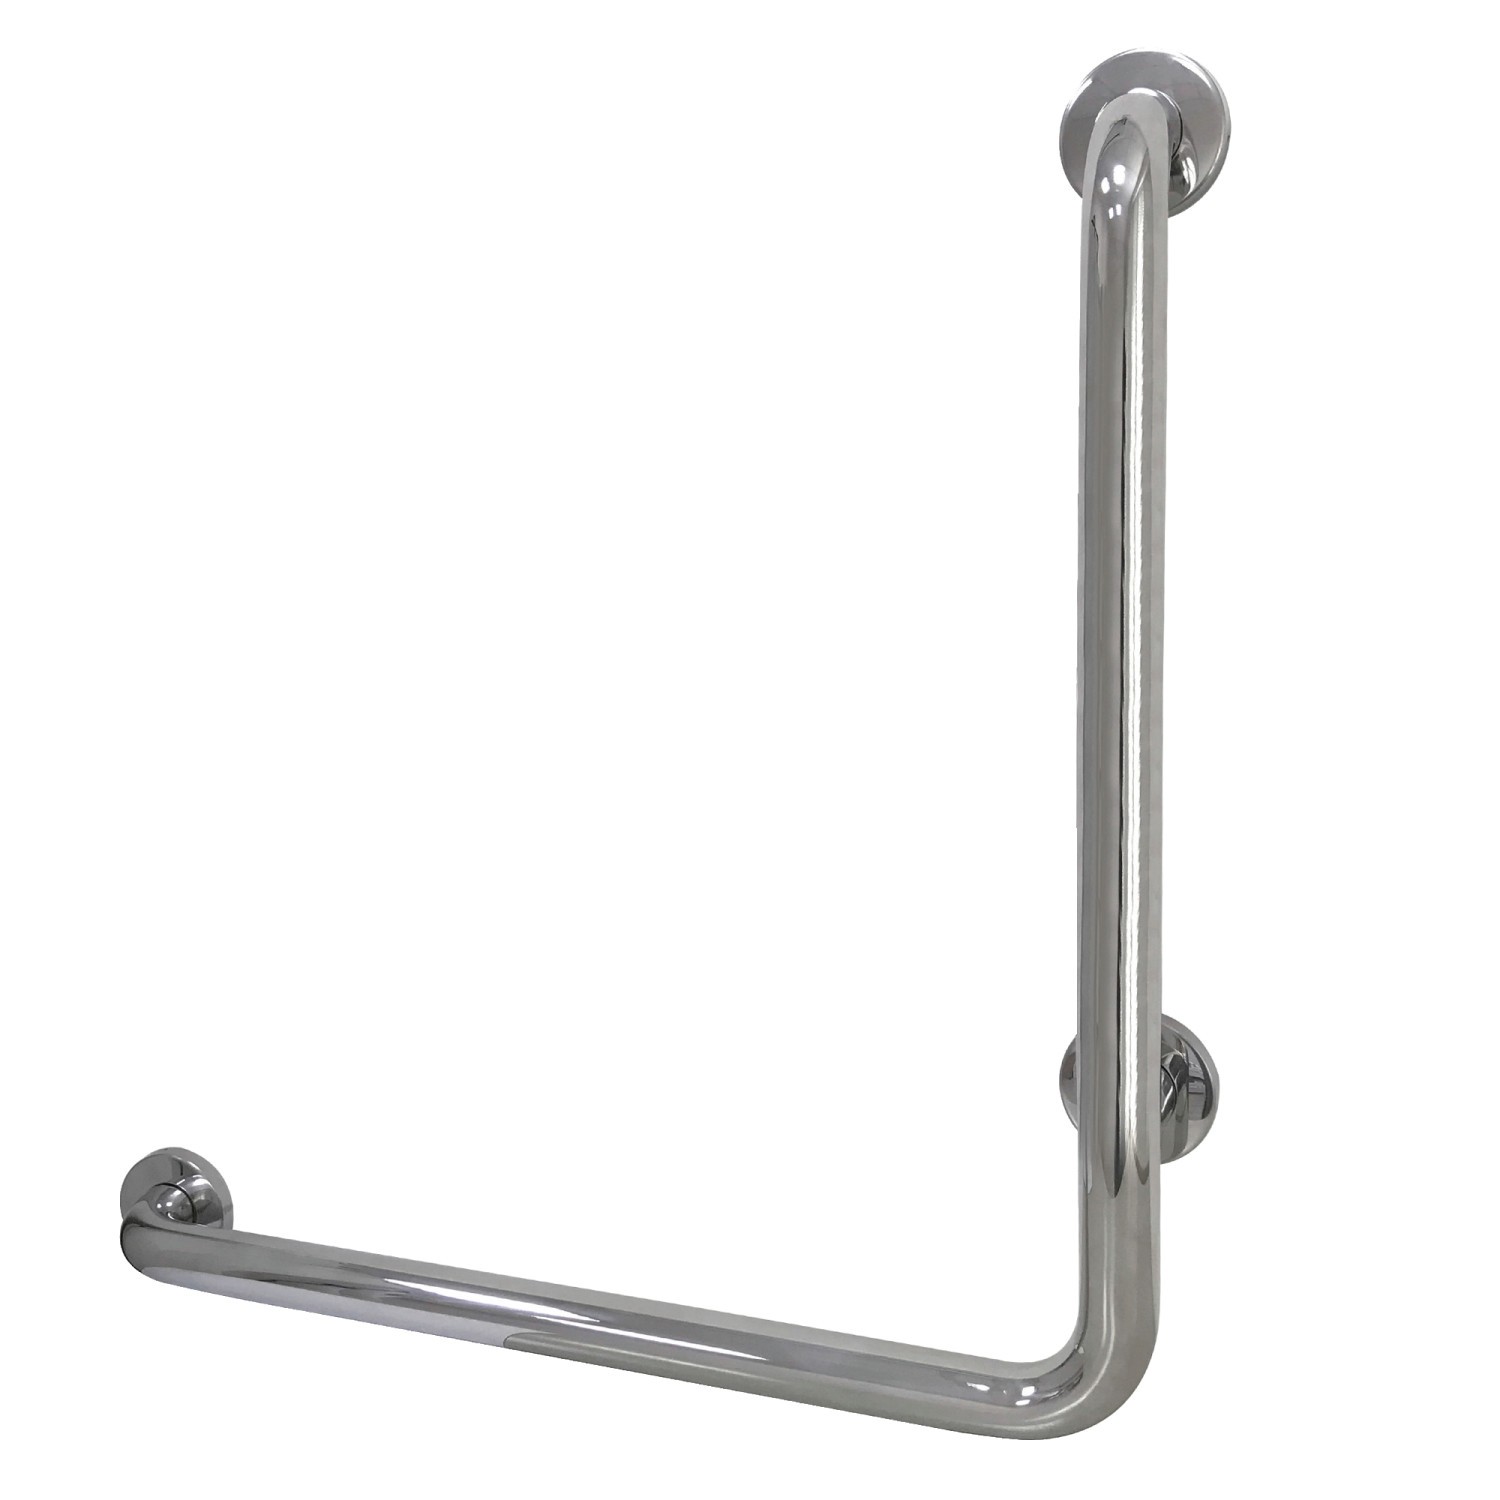 KINGSTON BRASS GBL1224CSL MADE TO MATCH 24 X 24 INCH L-SHAPED GRAB BAR - LEFT HAND